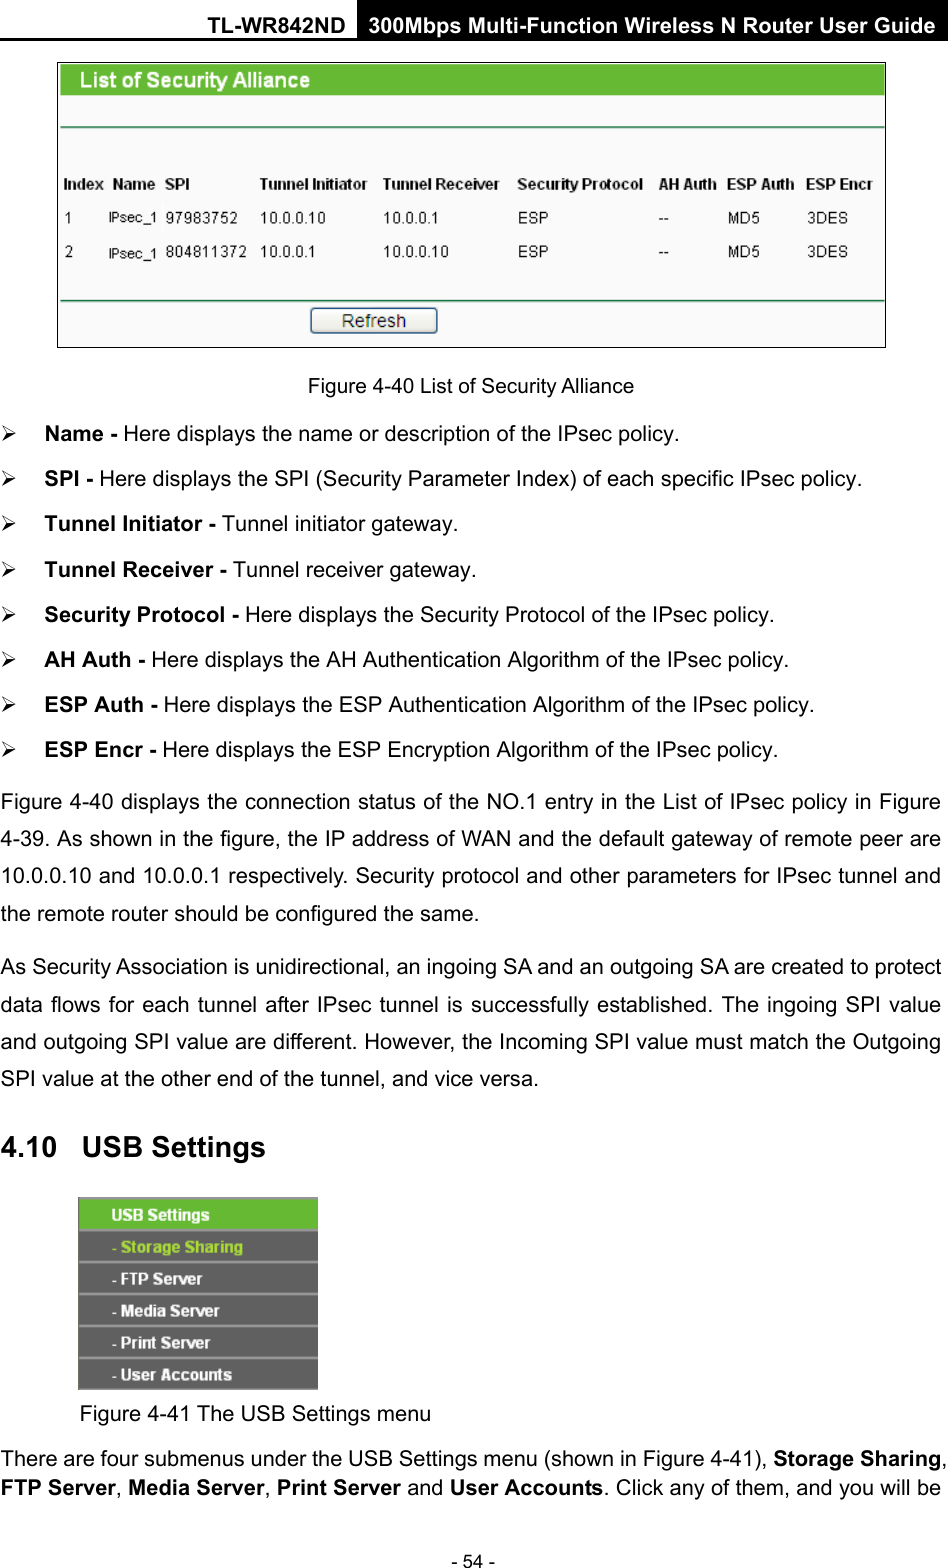 TL-WR842ND 300Mbps Multi-Function Wireless N Router User Guide  - 54 -  Figure 4-40 List of Security Alliance  Name - Here displays the name or description of the IPsec policy.    SPI - Here displays the SPI (Security Parameter Index) of each specific IPsec policy.    Tunnel Initiator - Tunnel initiator gateway.    Tunnel Receiver - Tunnel receiver gateway.    Security Protocol - Here displays the Security Protocol of the IPsec policy.    AH Auth - Here displays the AH Authentication Algorithm of the IPsec policy.    ESP Auth - Here displays the ESP Authentication Algorithm of the IPsec policy.    ESP Encr - Here displays the ESP Encryption Algorithm of the IPsec policy.   Figure 4-40 displays the connection status of the NO.1 entry in the List of IPsec policy in Figure 4-39. As shown in the figure, the IP address of WAN and the default gateway of remote peer are 10.0.0.10 and 10.0.0.1 respectively. Security protocol and other parameters for IPsec tunnel and the remote router should be configured the same. As Security Association is unidirectional, an ingoing SA and an outgoing SA are created to protect data flows for each tunnel after IPsec tunnel is successfully established. The ingoing SPI value and outgoing SPI value are different. However, the Incoming SPI value must match the Outgoing SPI value at the other end of the tunnel, and vice versa.   4.10 USB Settings  Figure 4-41 The USB Settings menu There are four submenus under the USB Settings menu (shown in Figure 4-41), Storage Sharing, FTP Server, Media Server, Print Server and User Accounts. Click any of them, and you will be 